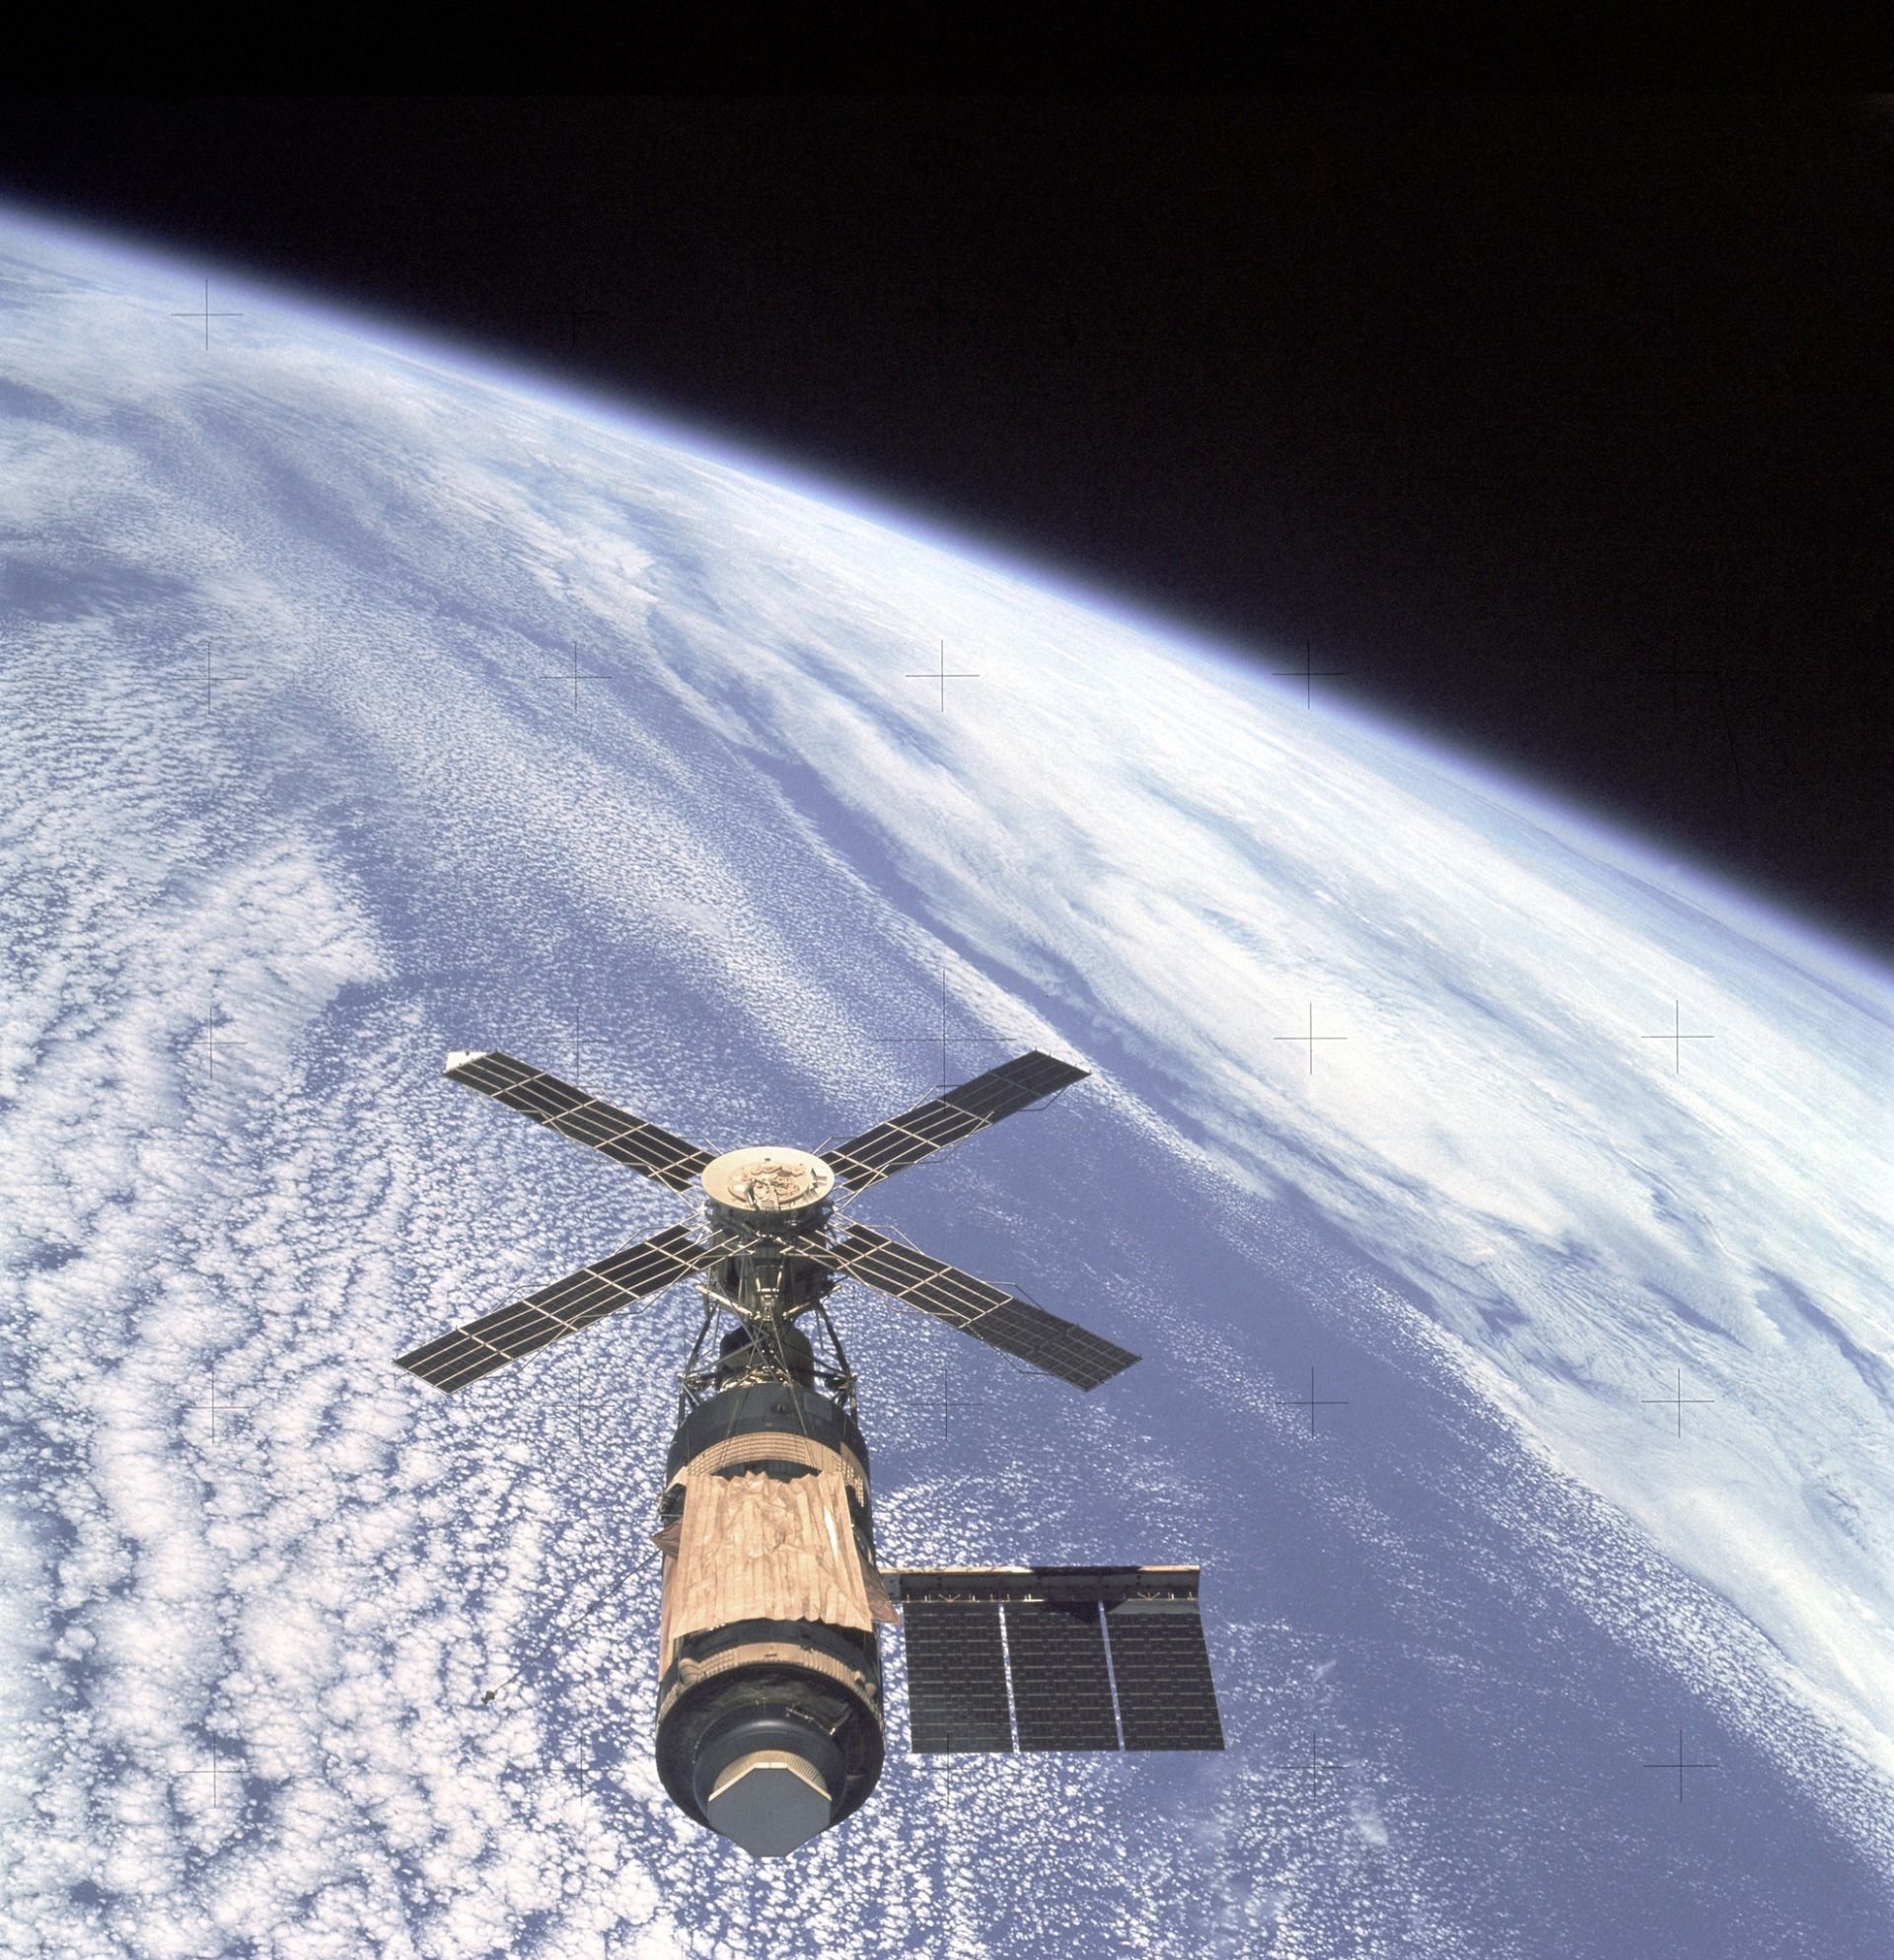 A view of Skylab over Earth